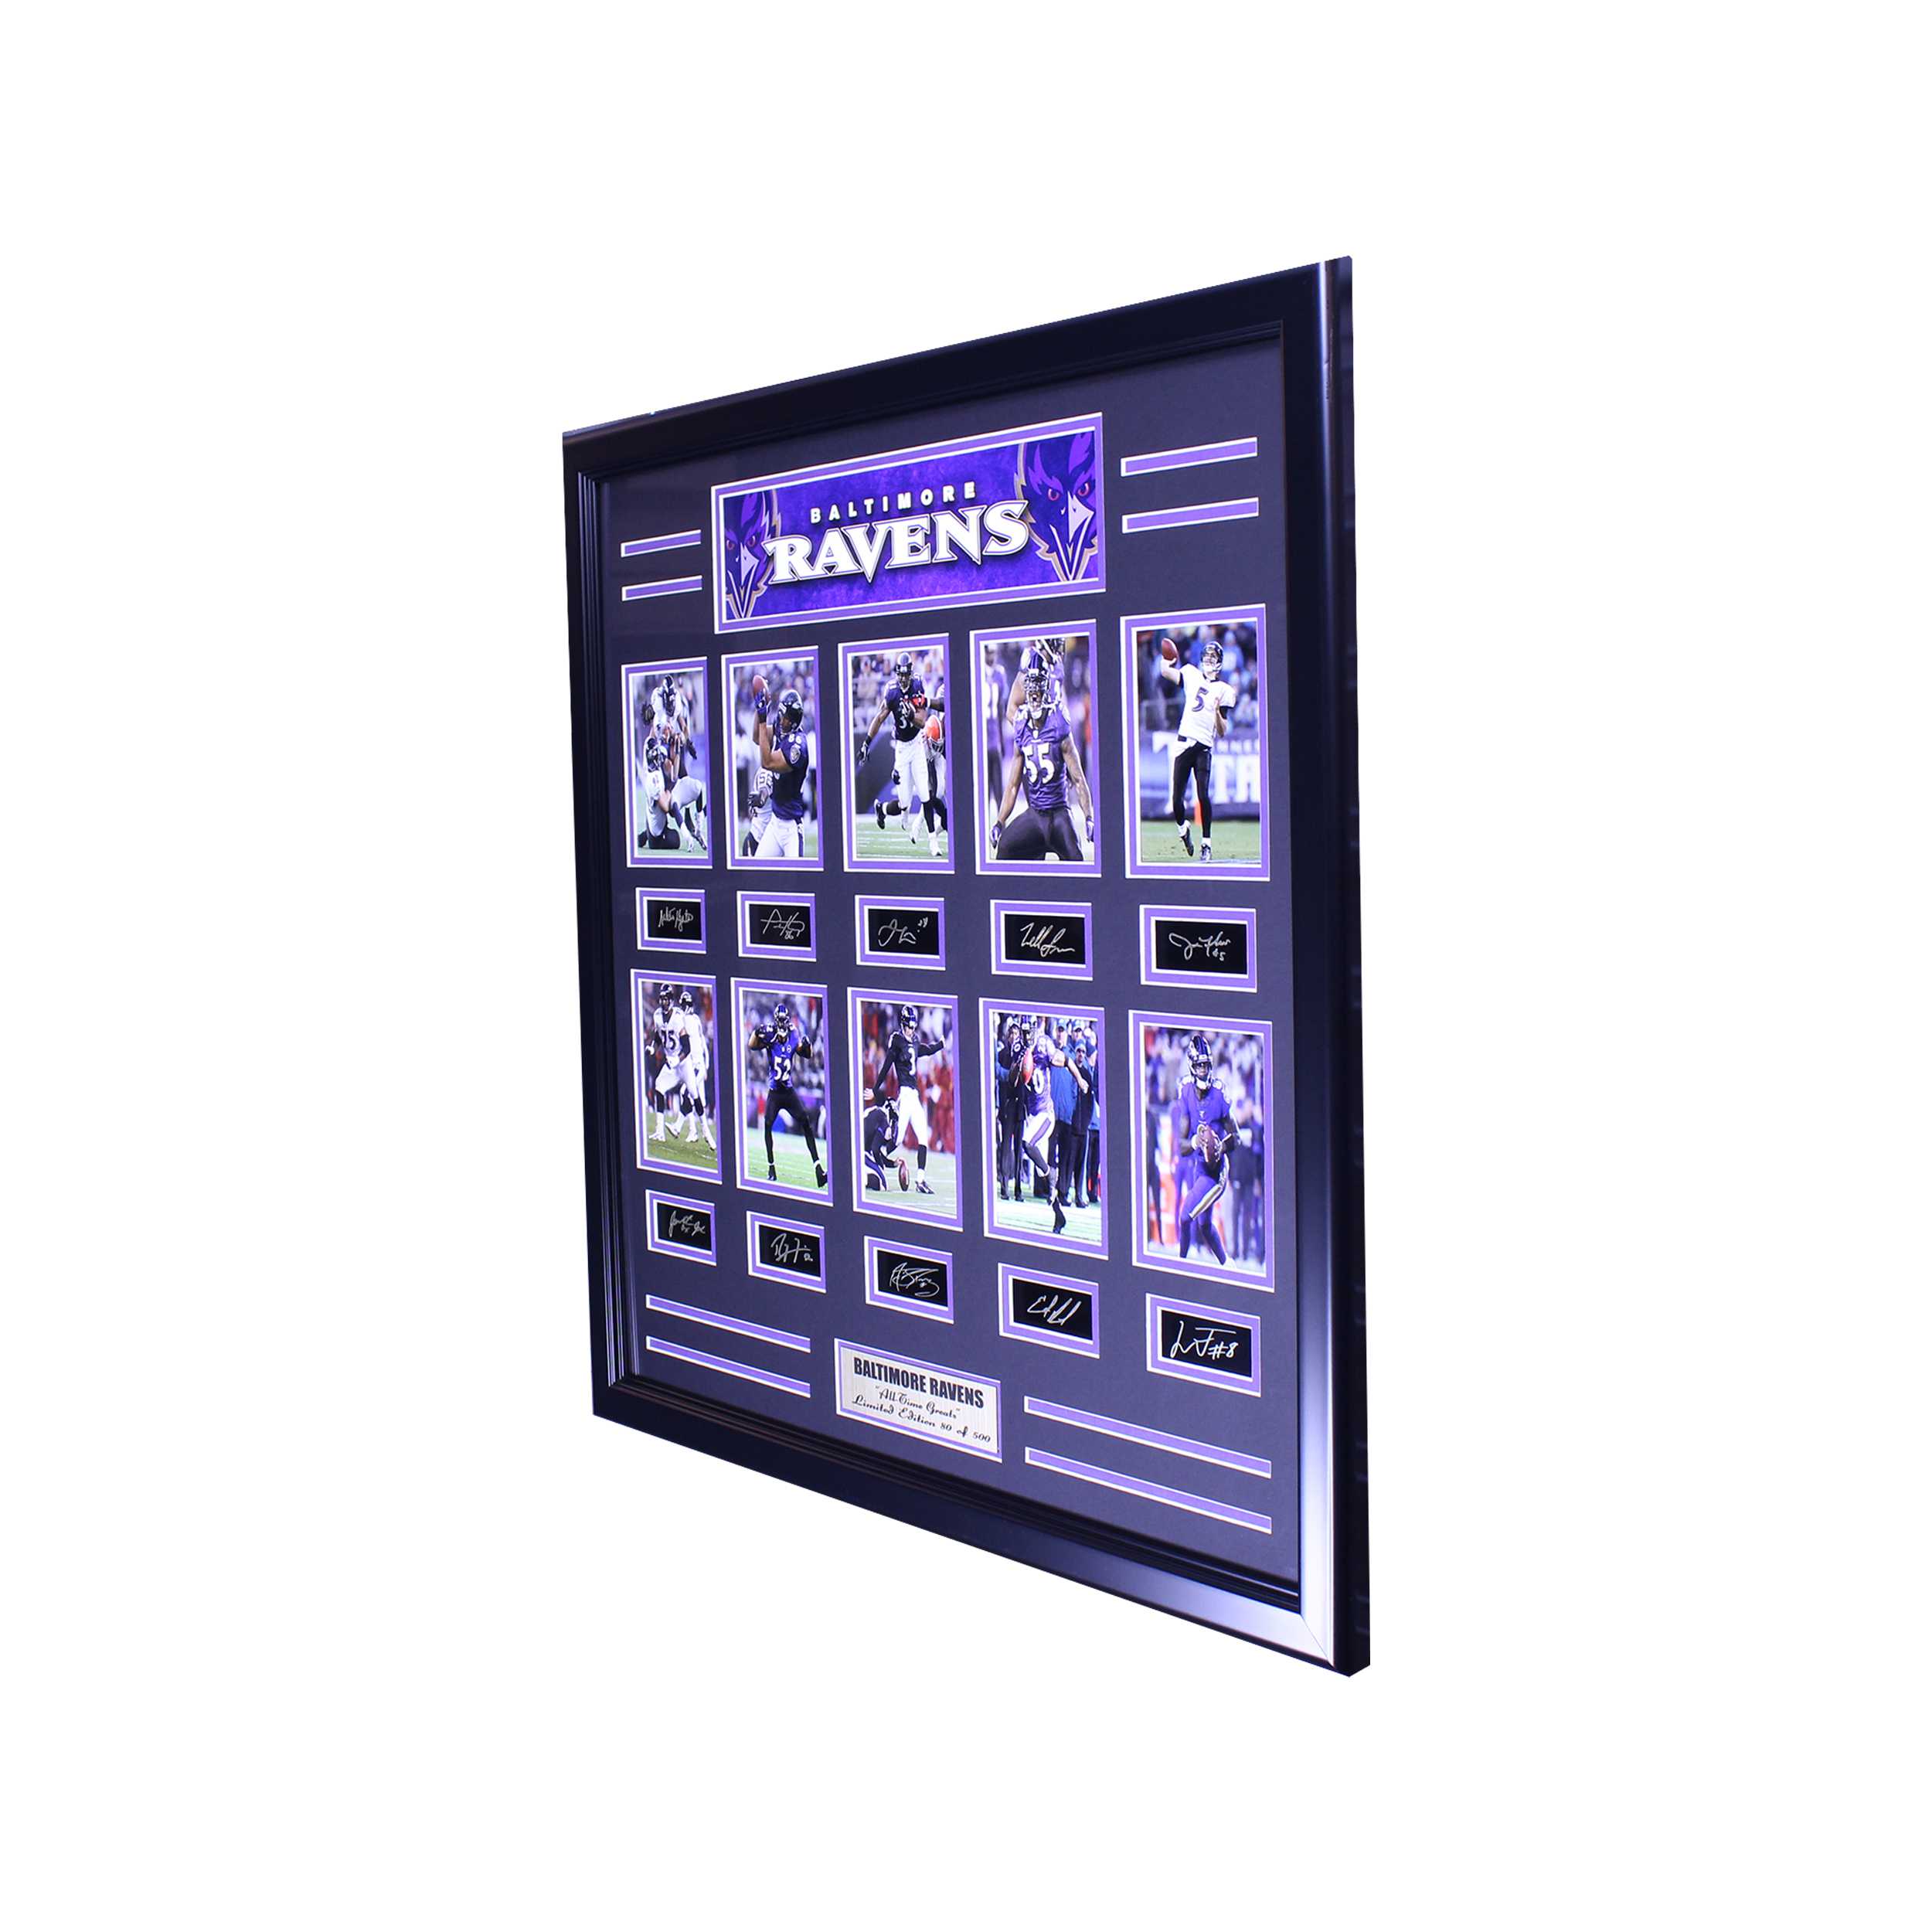 BALTIMORE RAVENS ALL TIME GREATS ENGRAVED SIGNATURE LARGE FRAME